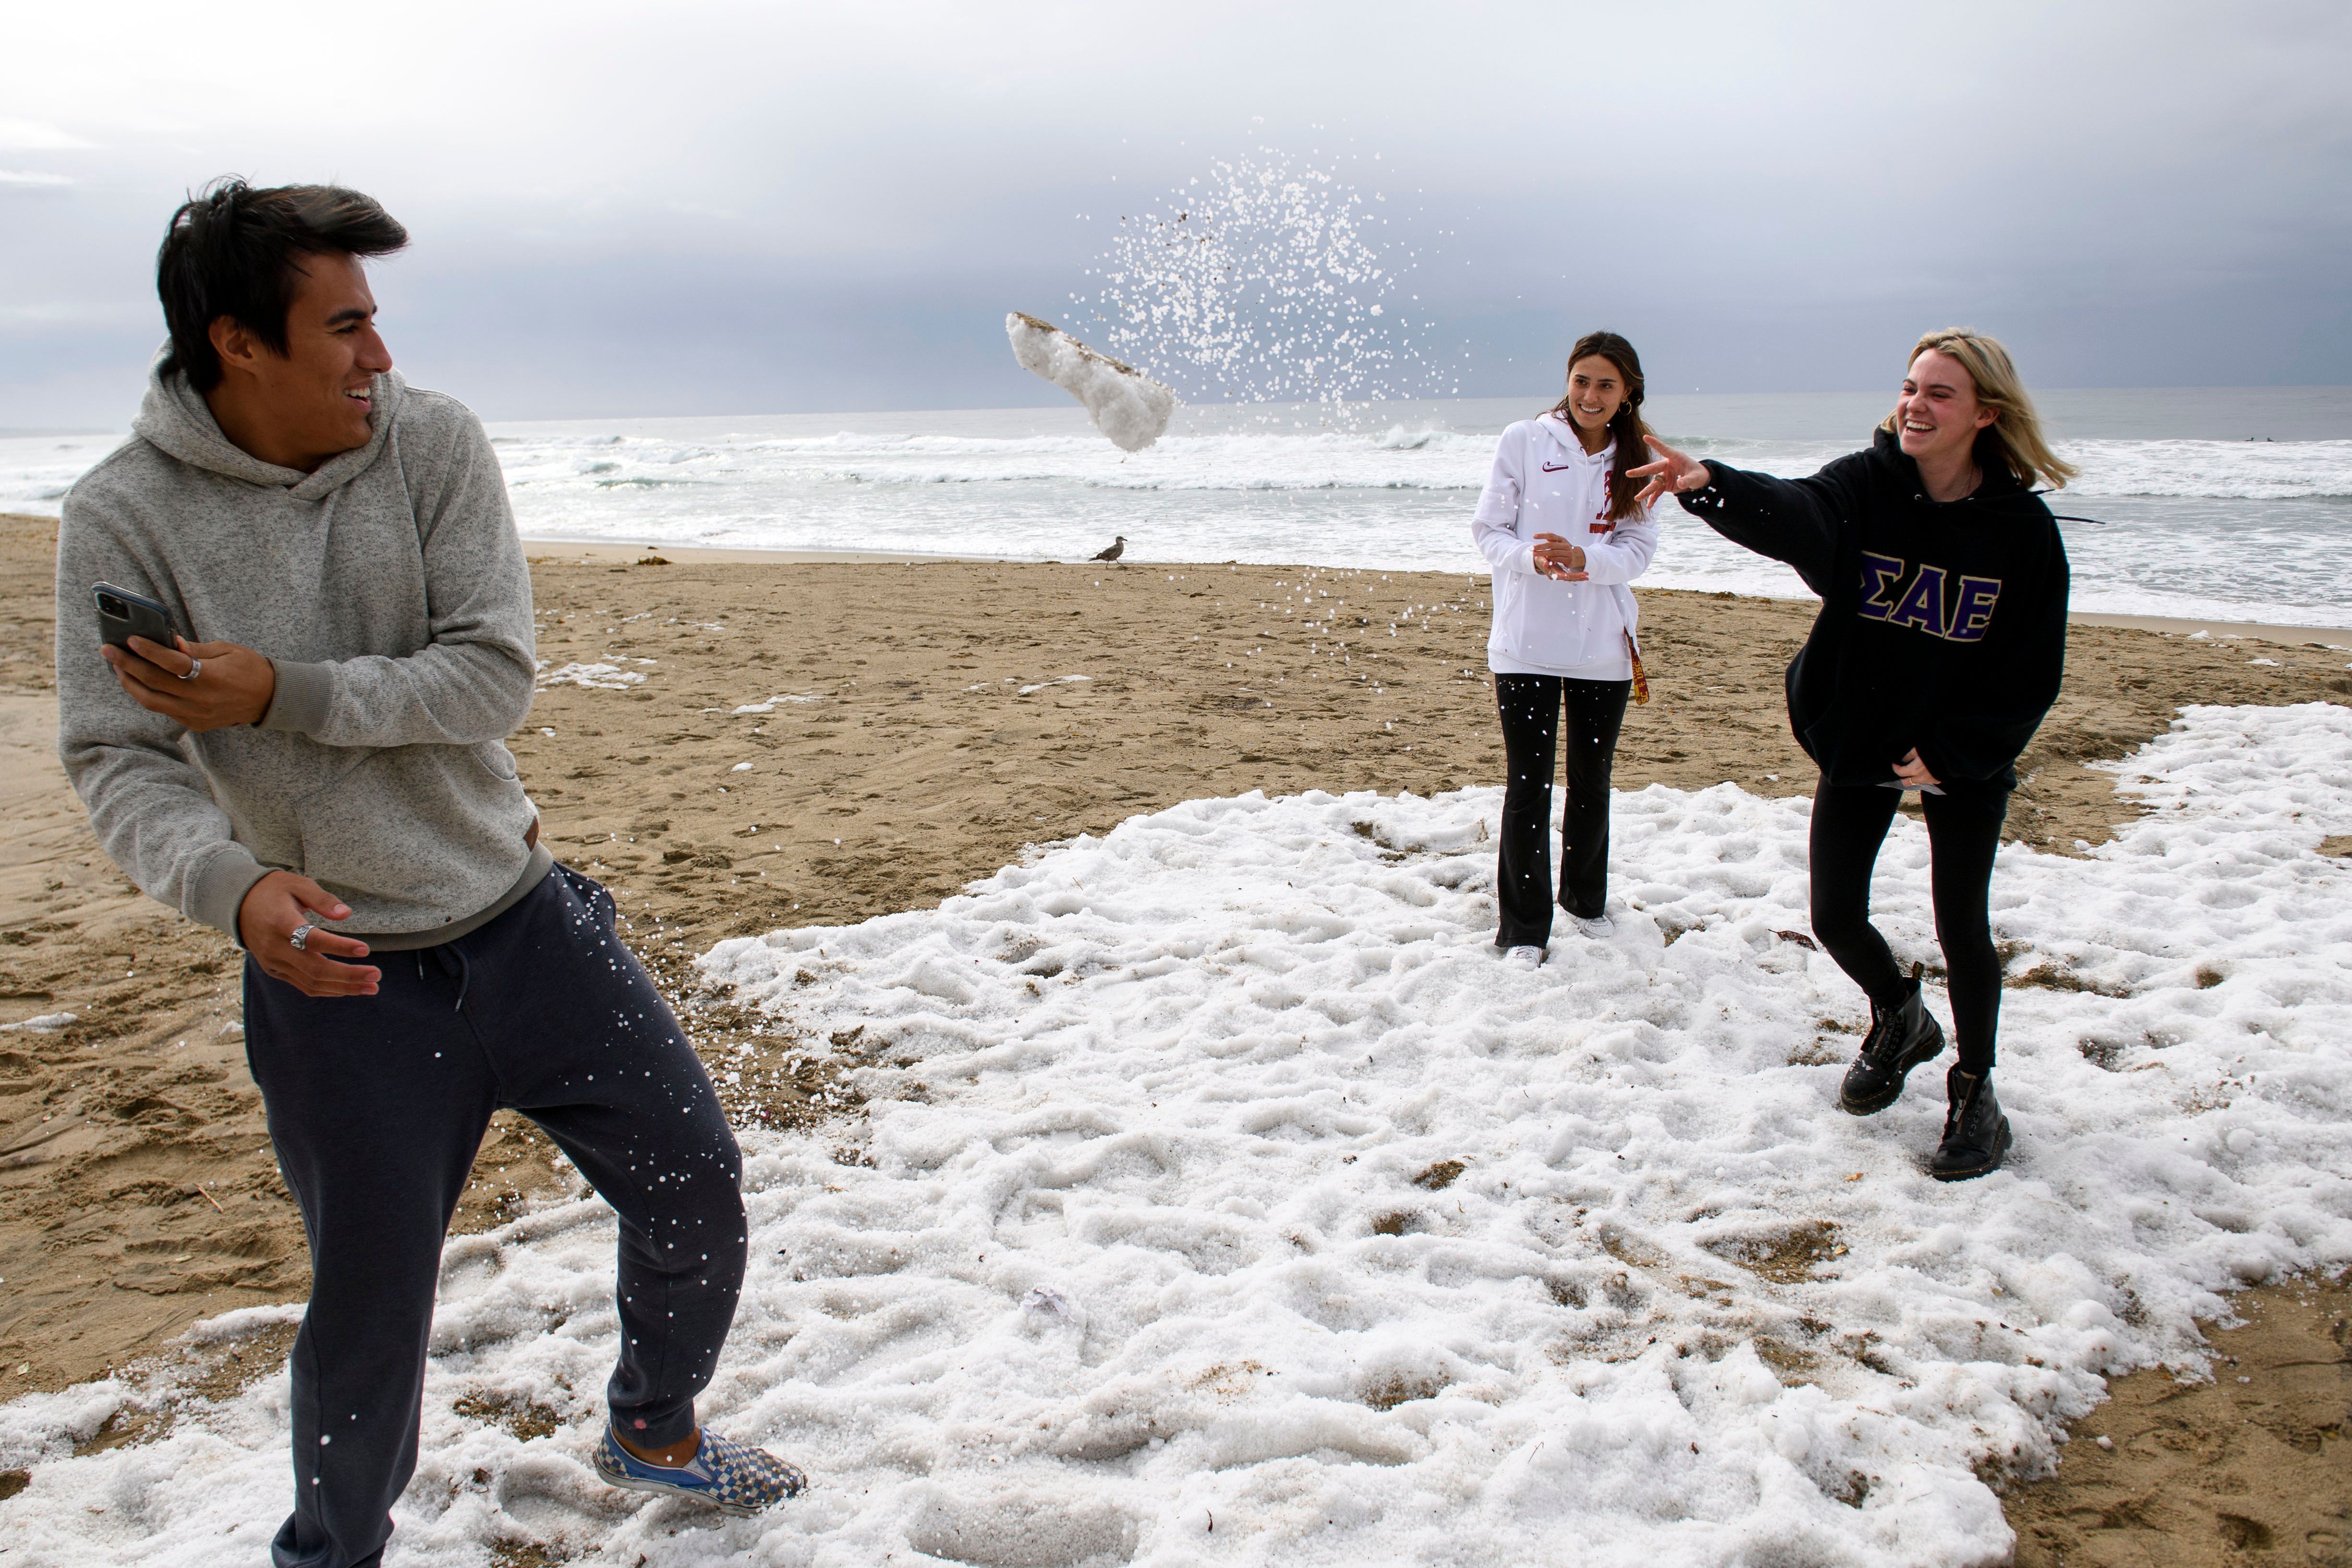 People play with hail on the beach following storms that blanketed the region with rain, snow, and hail, on January 29, 2021 in Manhattan Beach, California